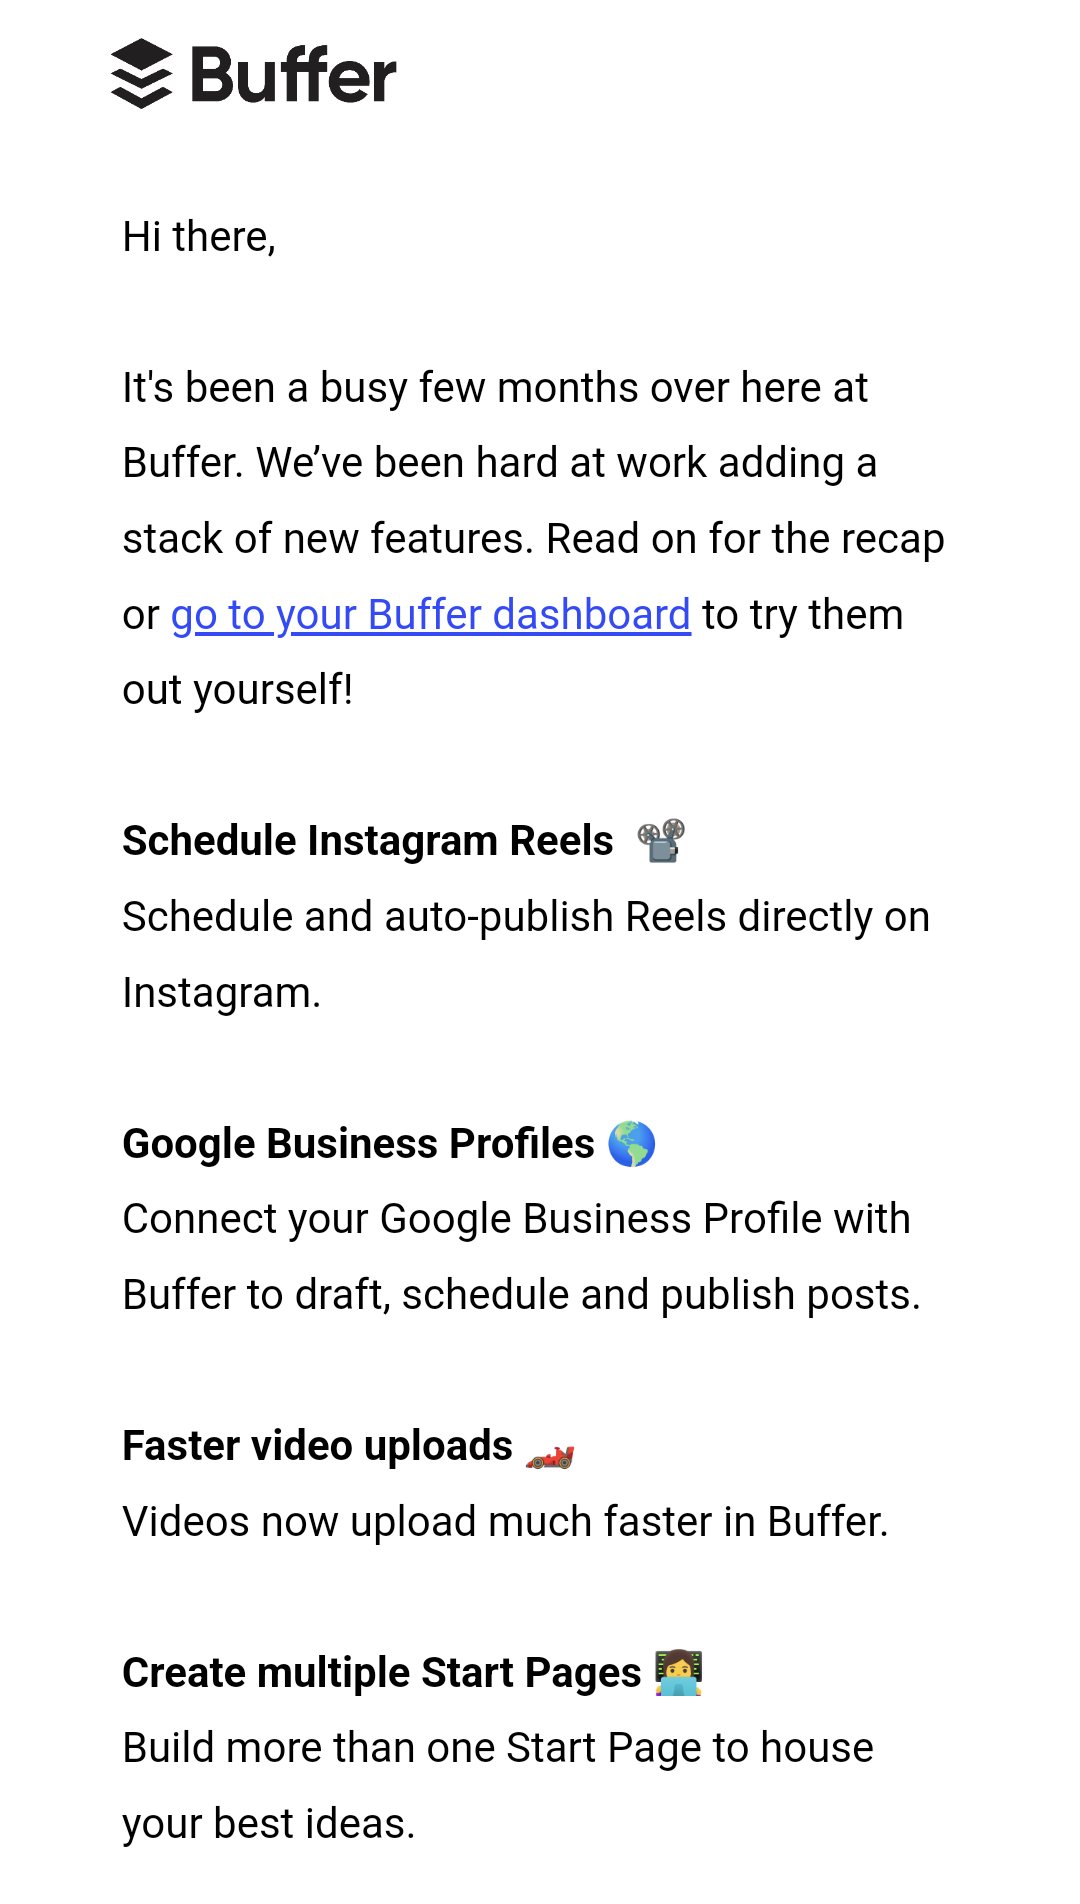 SaaS Plain Text Emails: Screenshot of Buffer's nearly plain text email